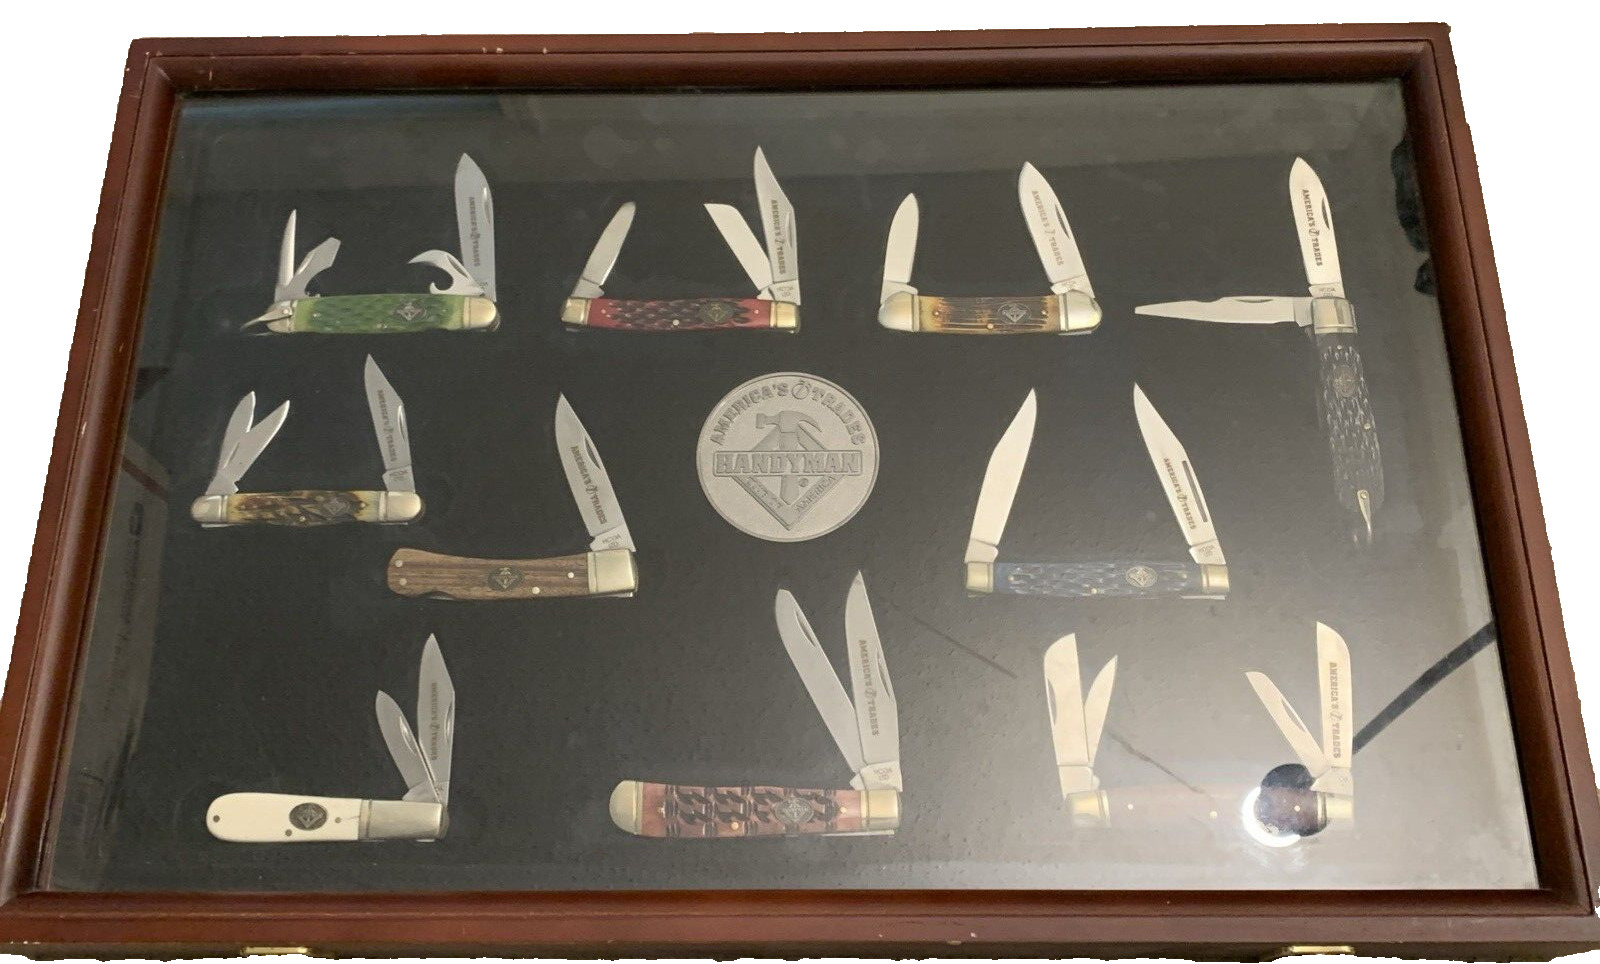 American Handyman Pocket Knives Set Of 10 With Display Case